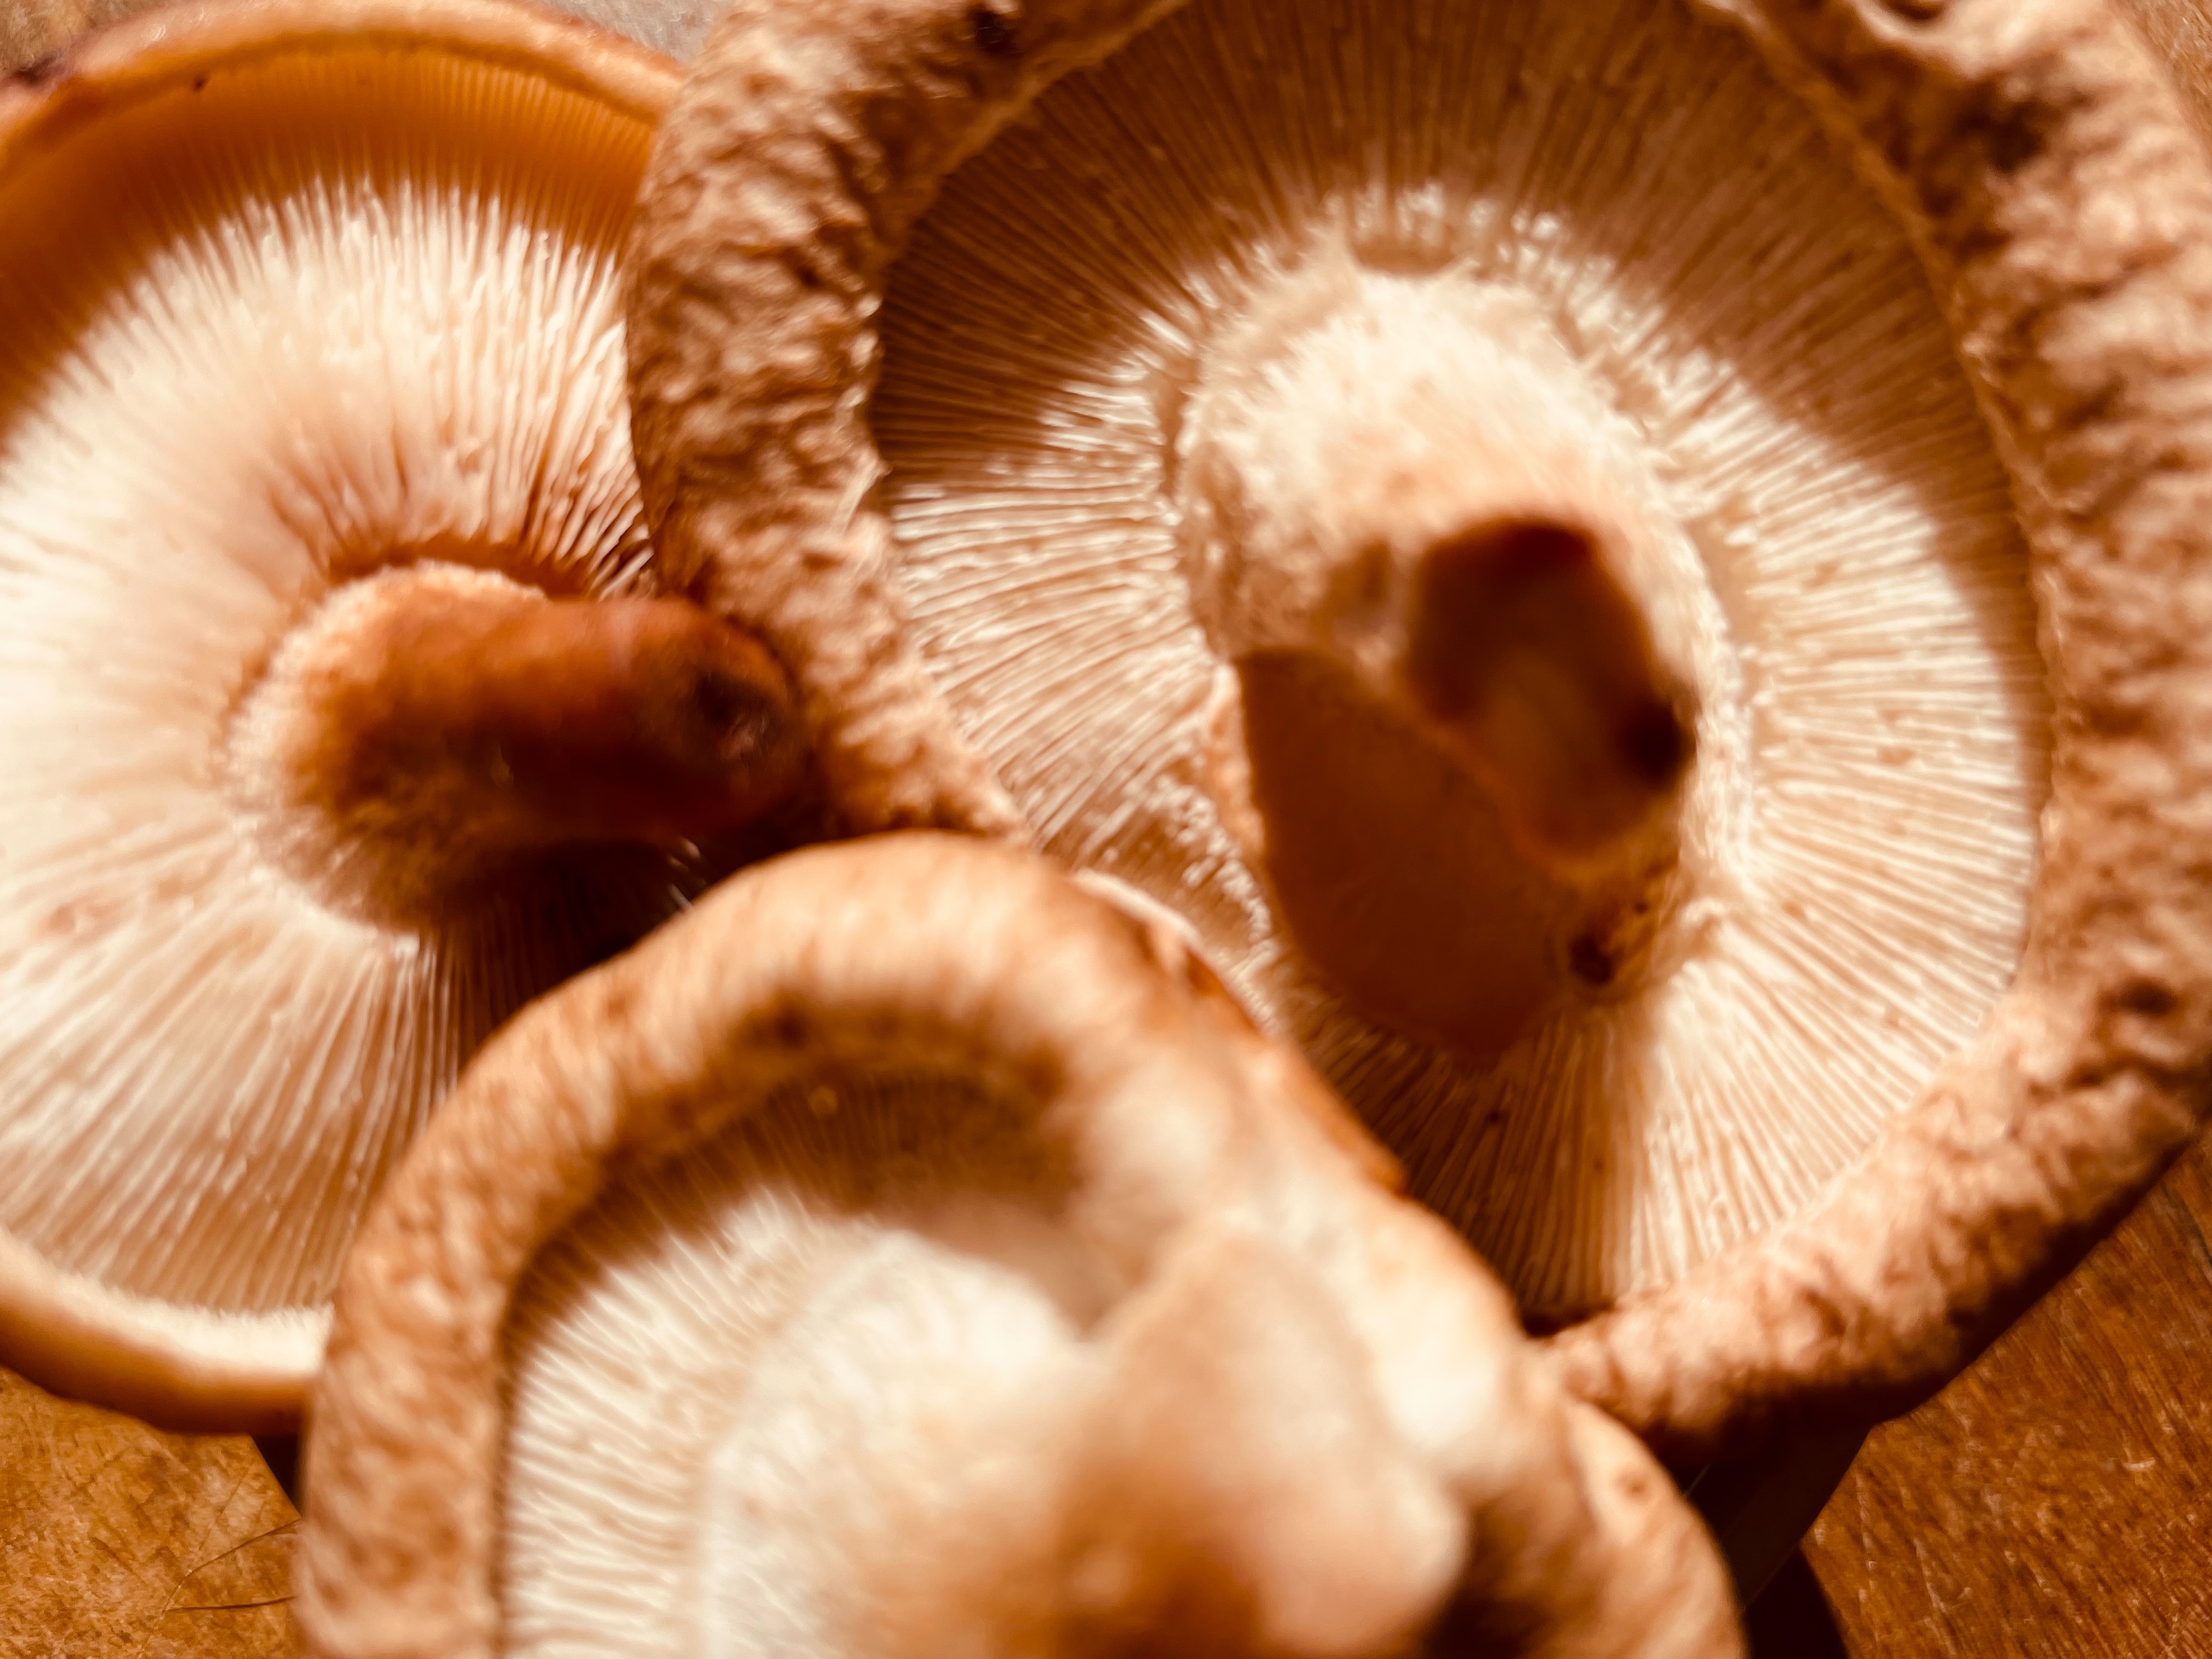 What are the anticancer strengths of Shiitake mushrooms?